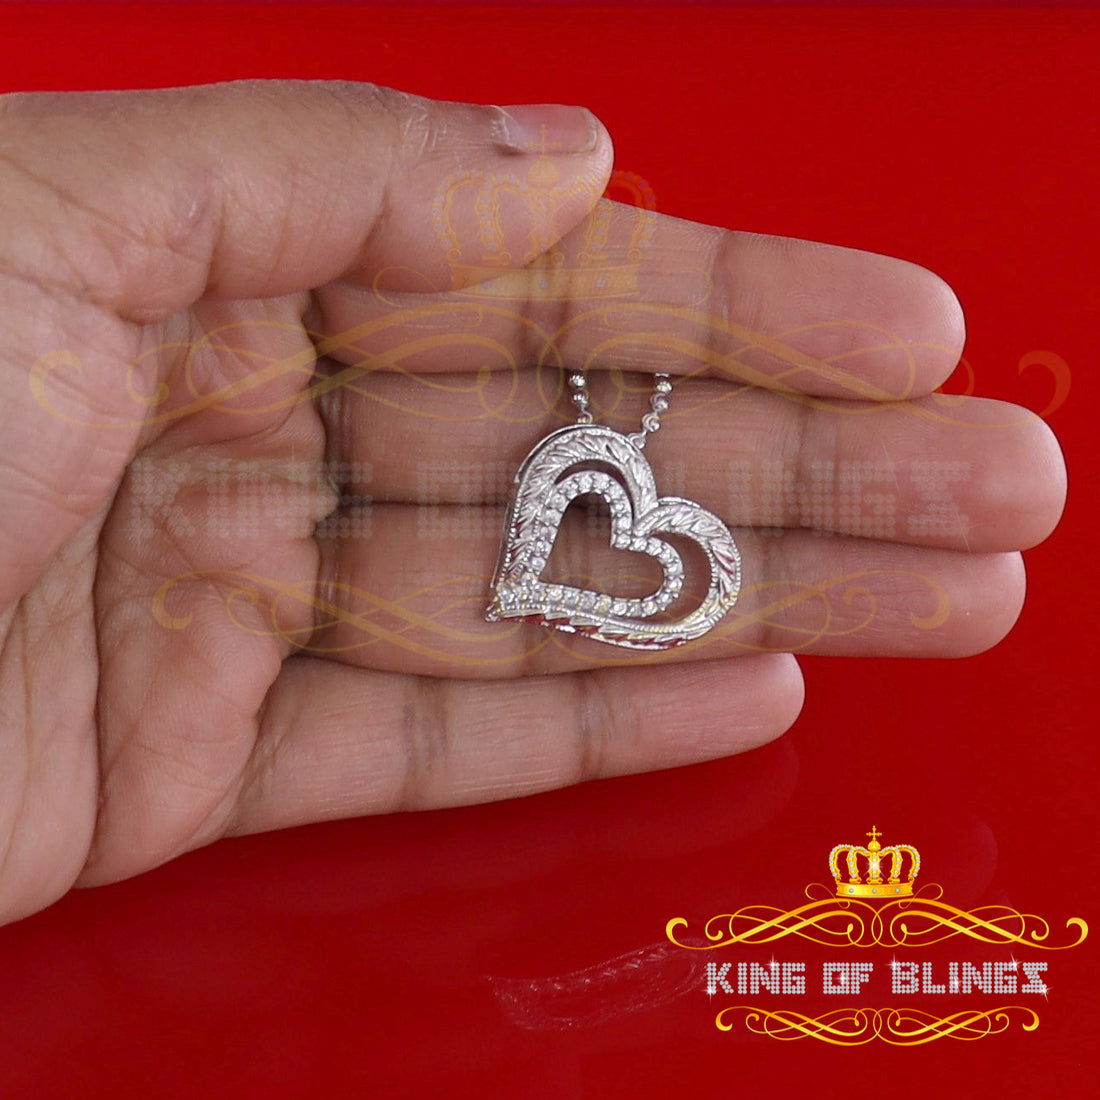 Fancy Attractive white Sterling Silver Heart Shape Pendant 0.87ct Cubic Zirconia KING OF BLINGS